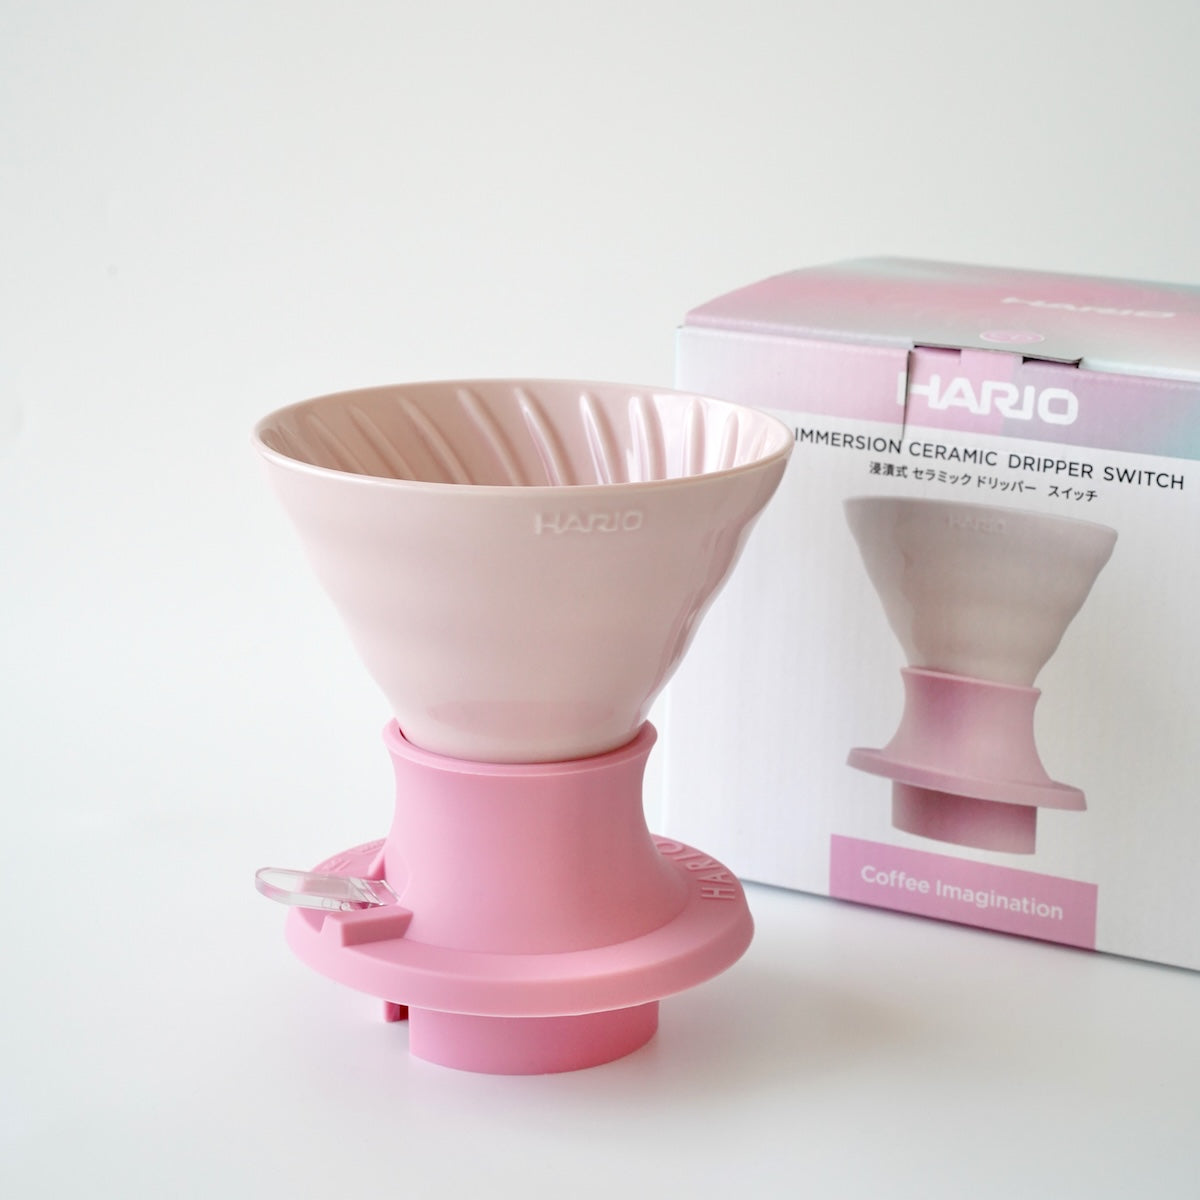 Hario Immersion Ceramic Dripper Switch 02 Candy Pink Lifestyle 2